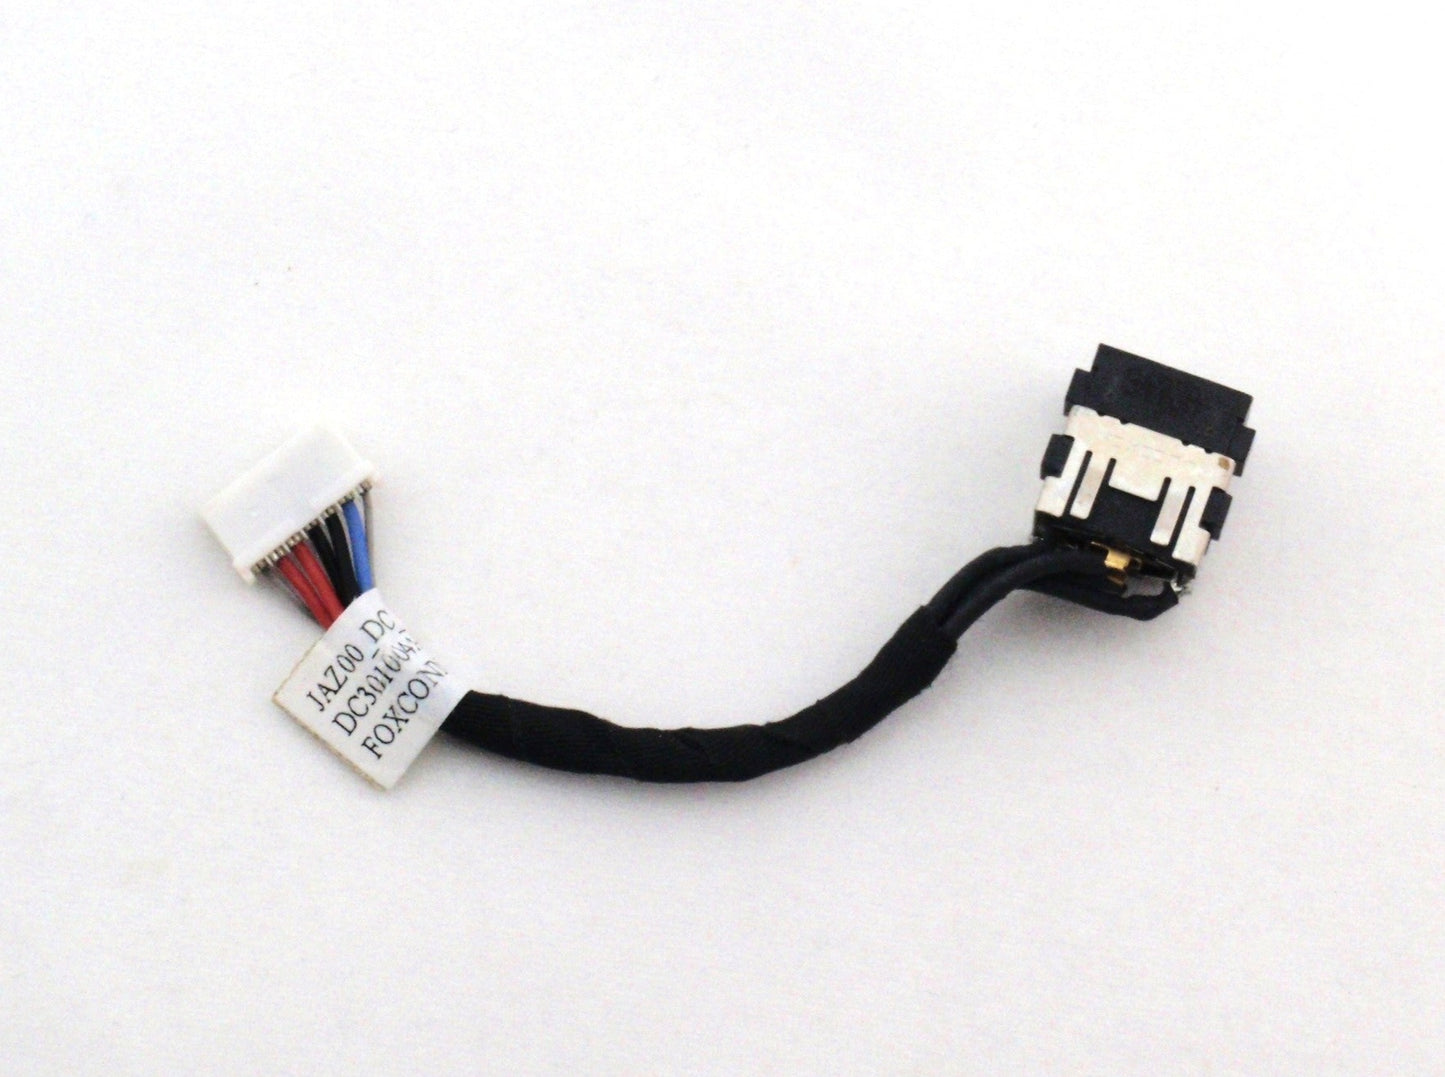 Dell DC In Power Jack Charging Port Cable Latitude E4200 E6420 CJ48C J90M8 DC301004A0L 0CJ48C 0J90M8 DC30100BO0L 0F161F F161F